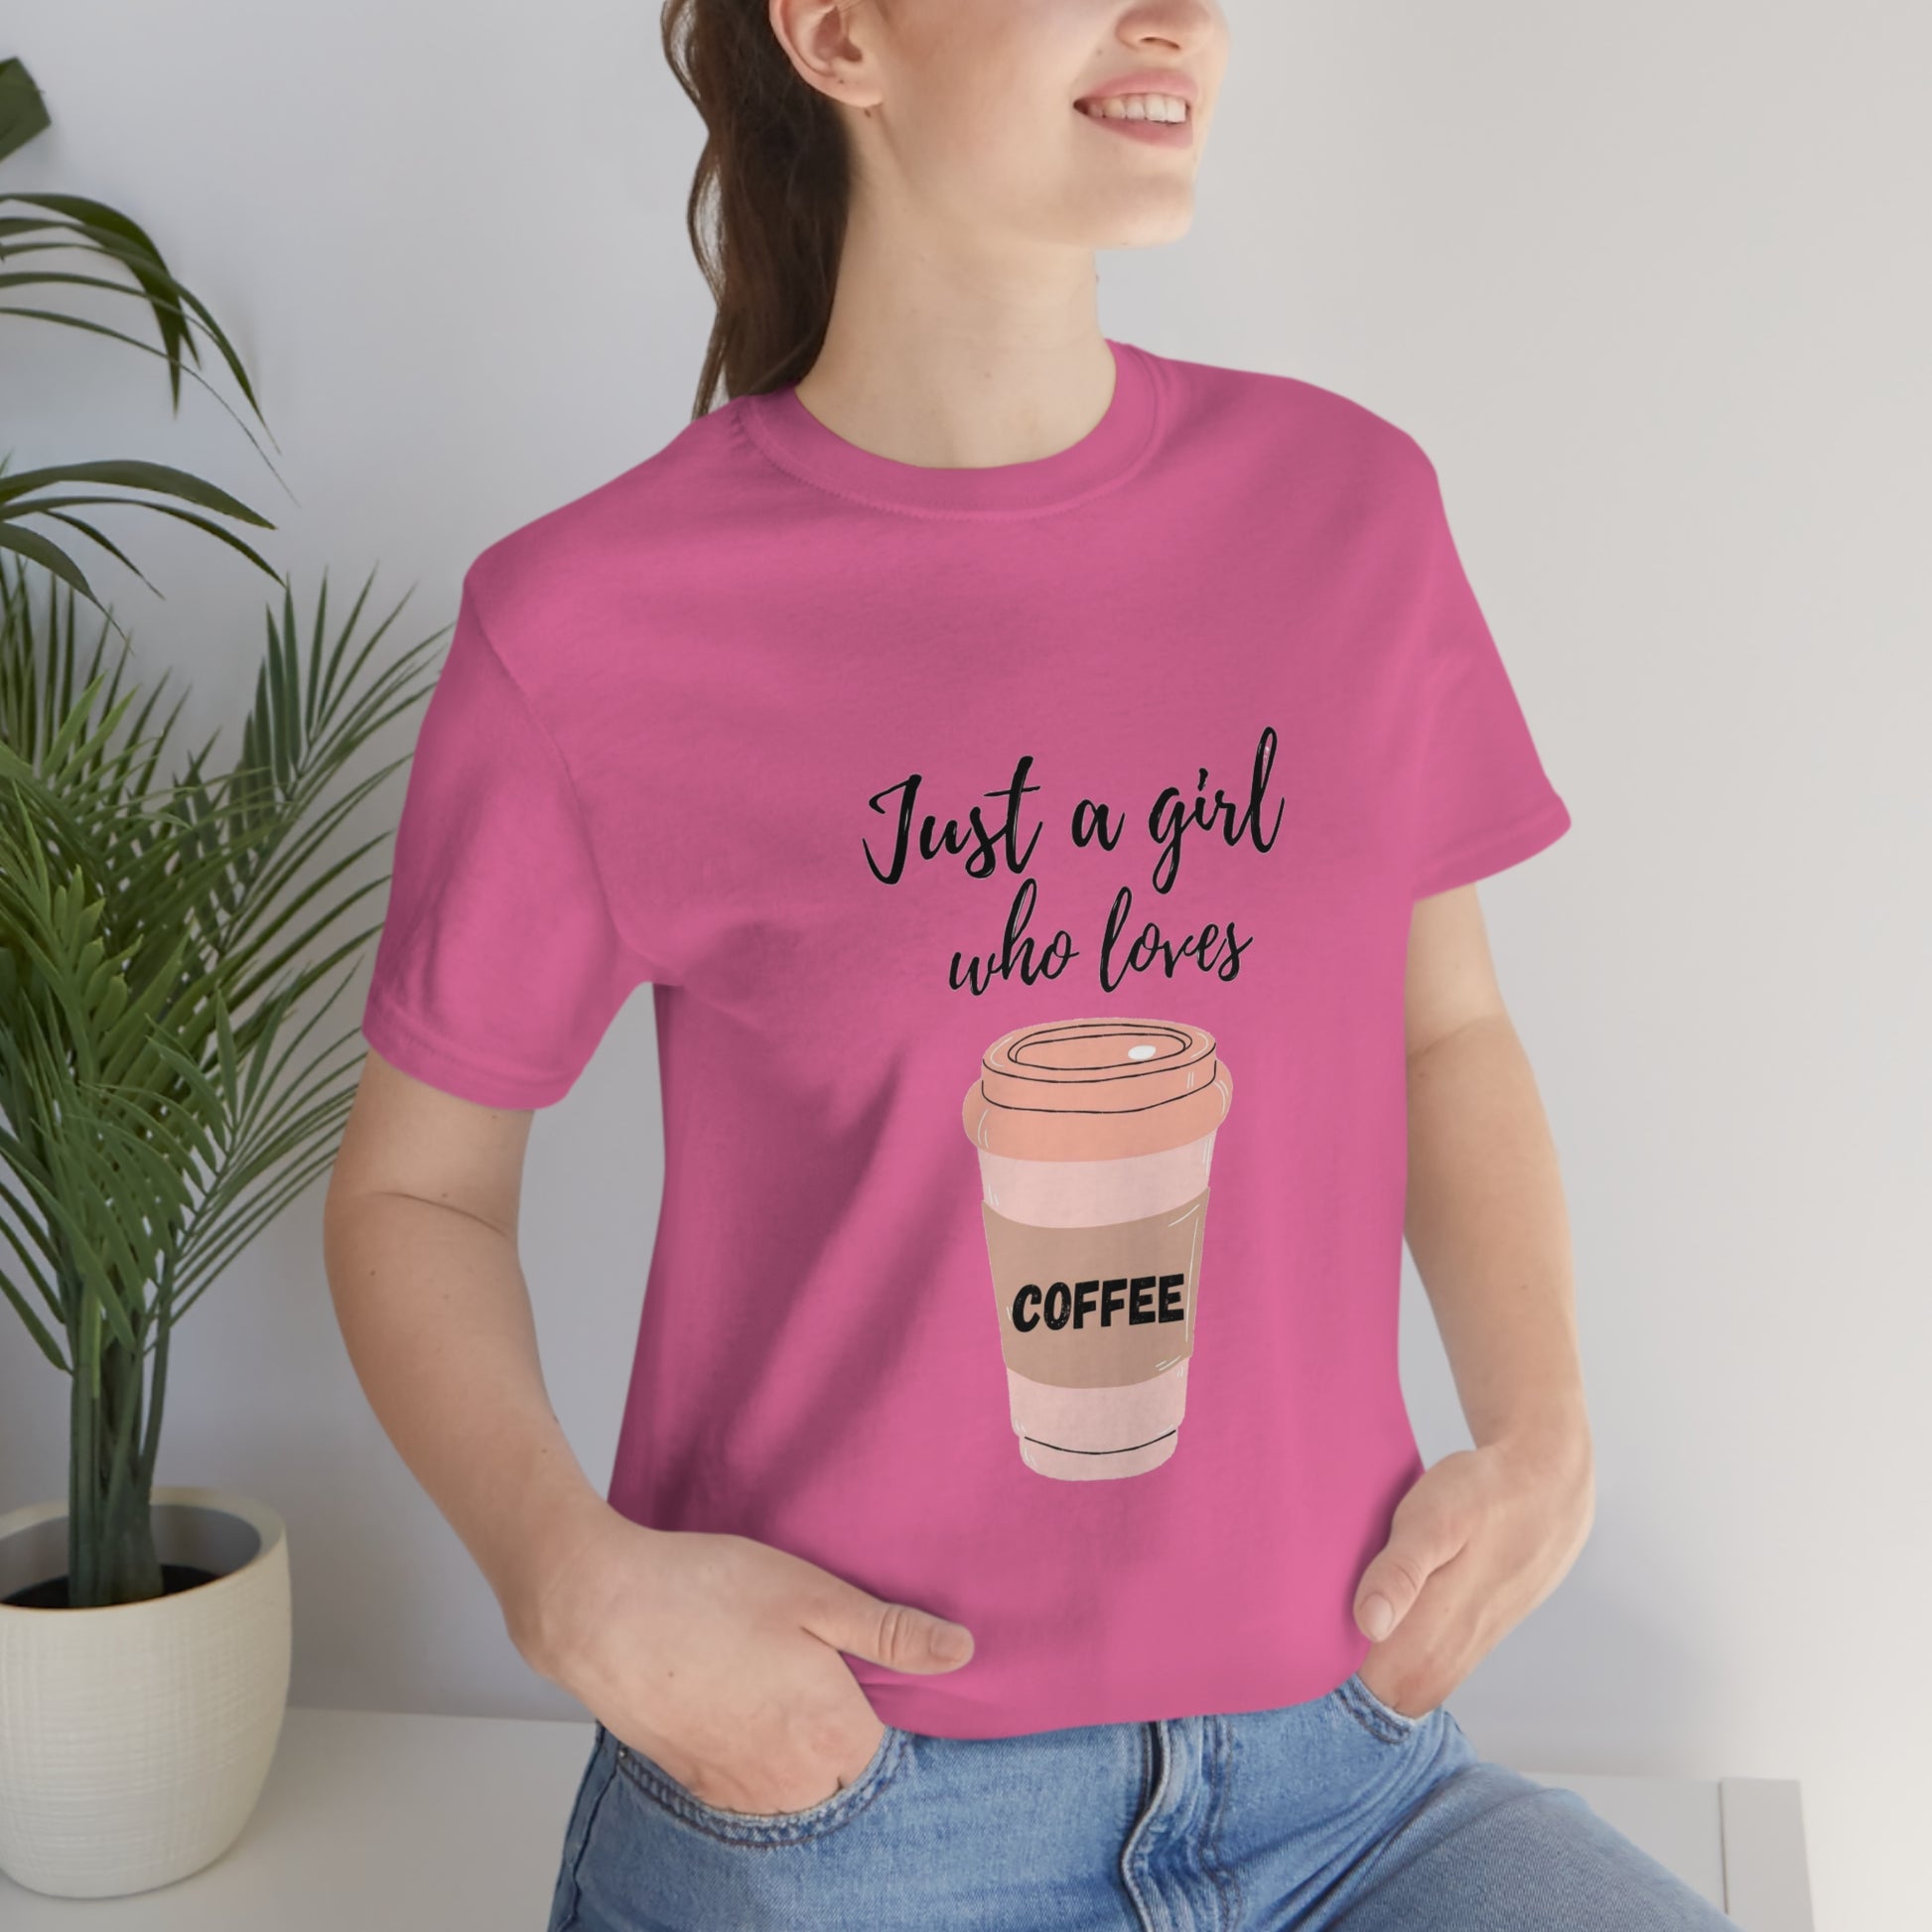 Just a girl who loves Coffee - Designed - Unisex Short Sleeve Tee